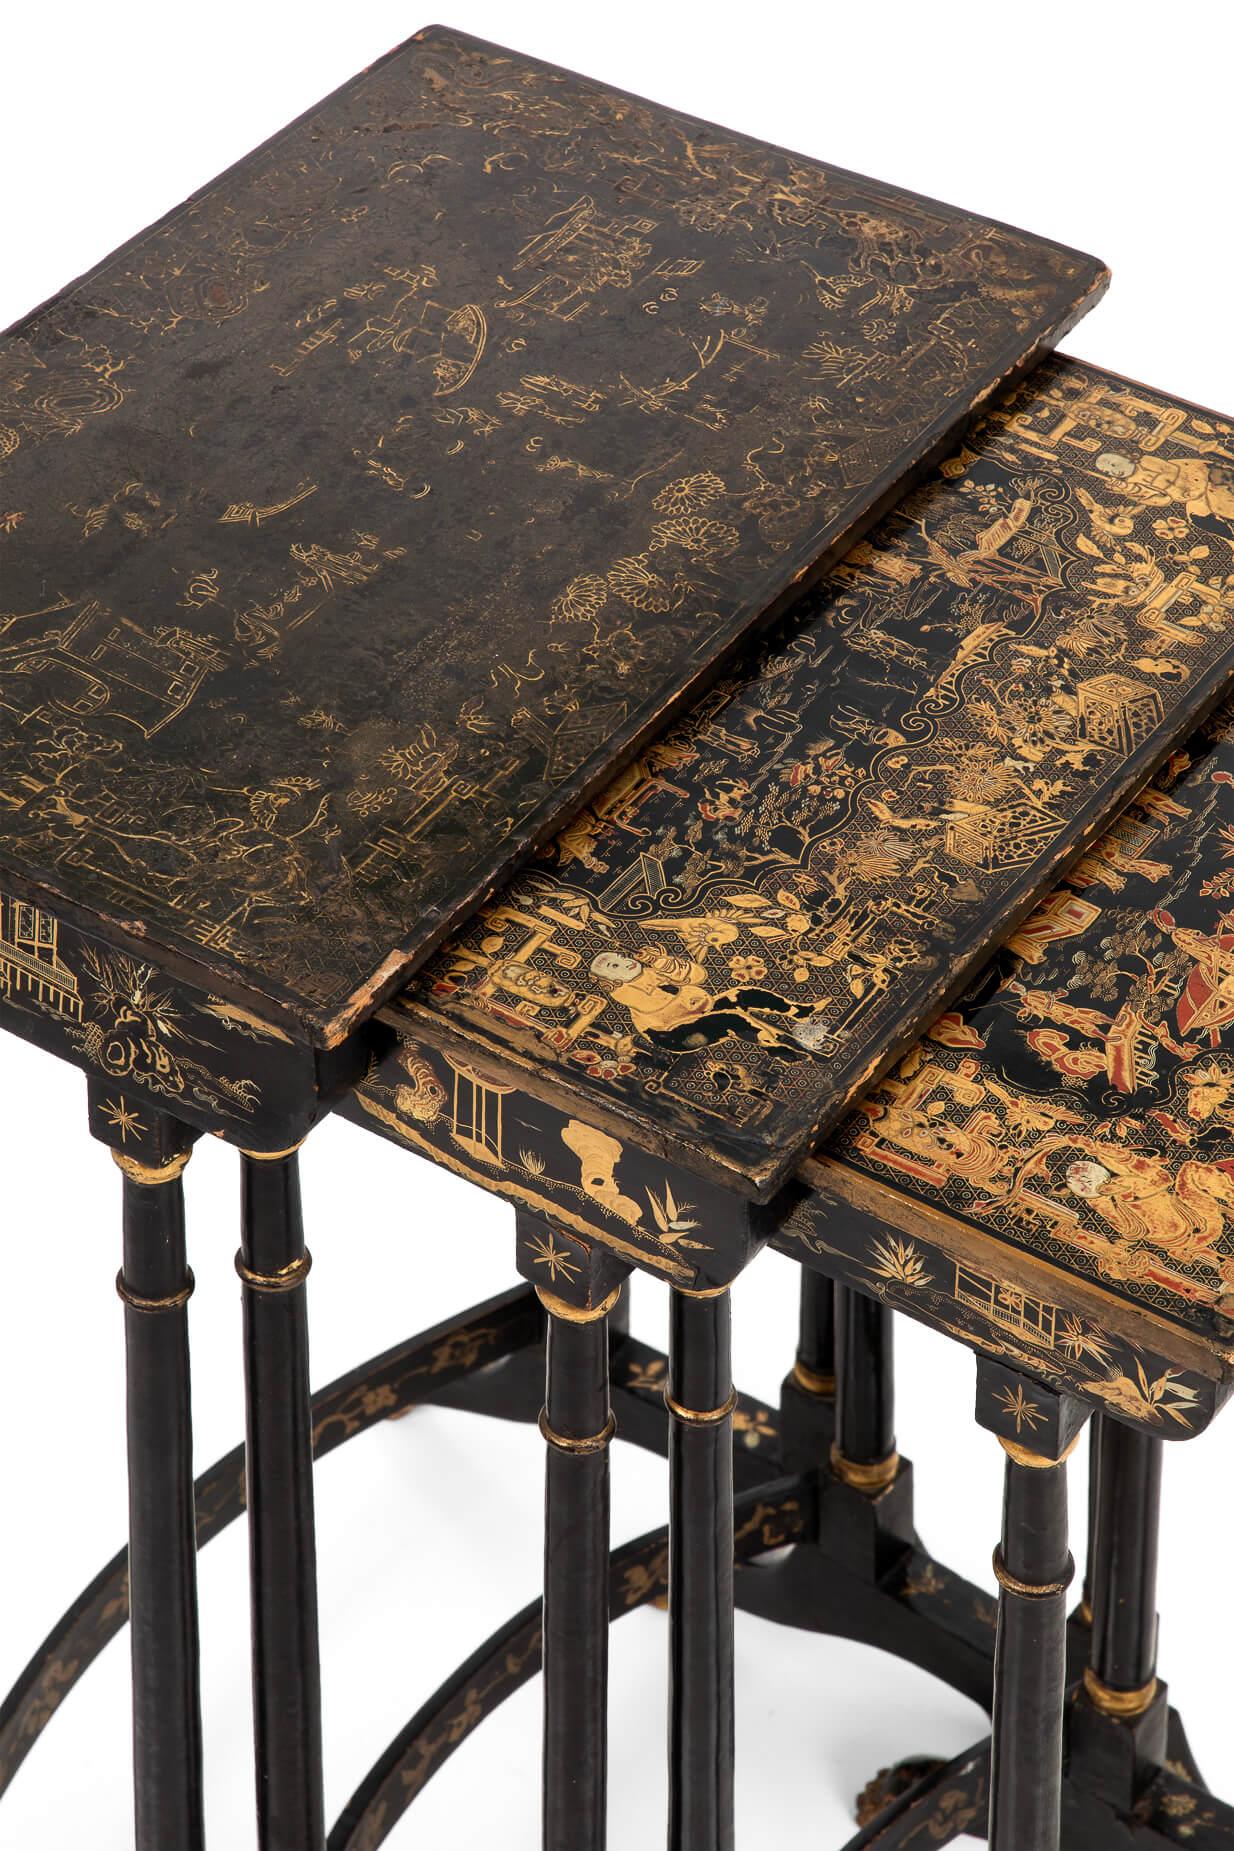 Nest of Three Regency Chinoiserie Gilt And Black Lacquer Tables, circa 1815 For Sale 5